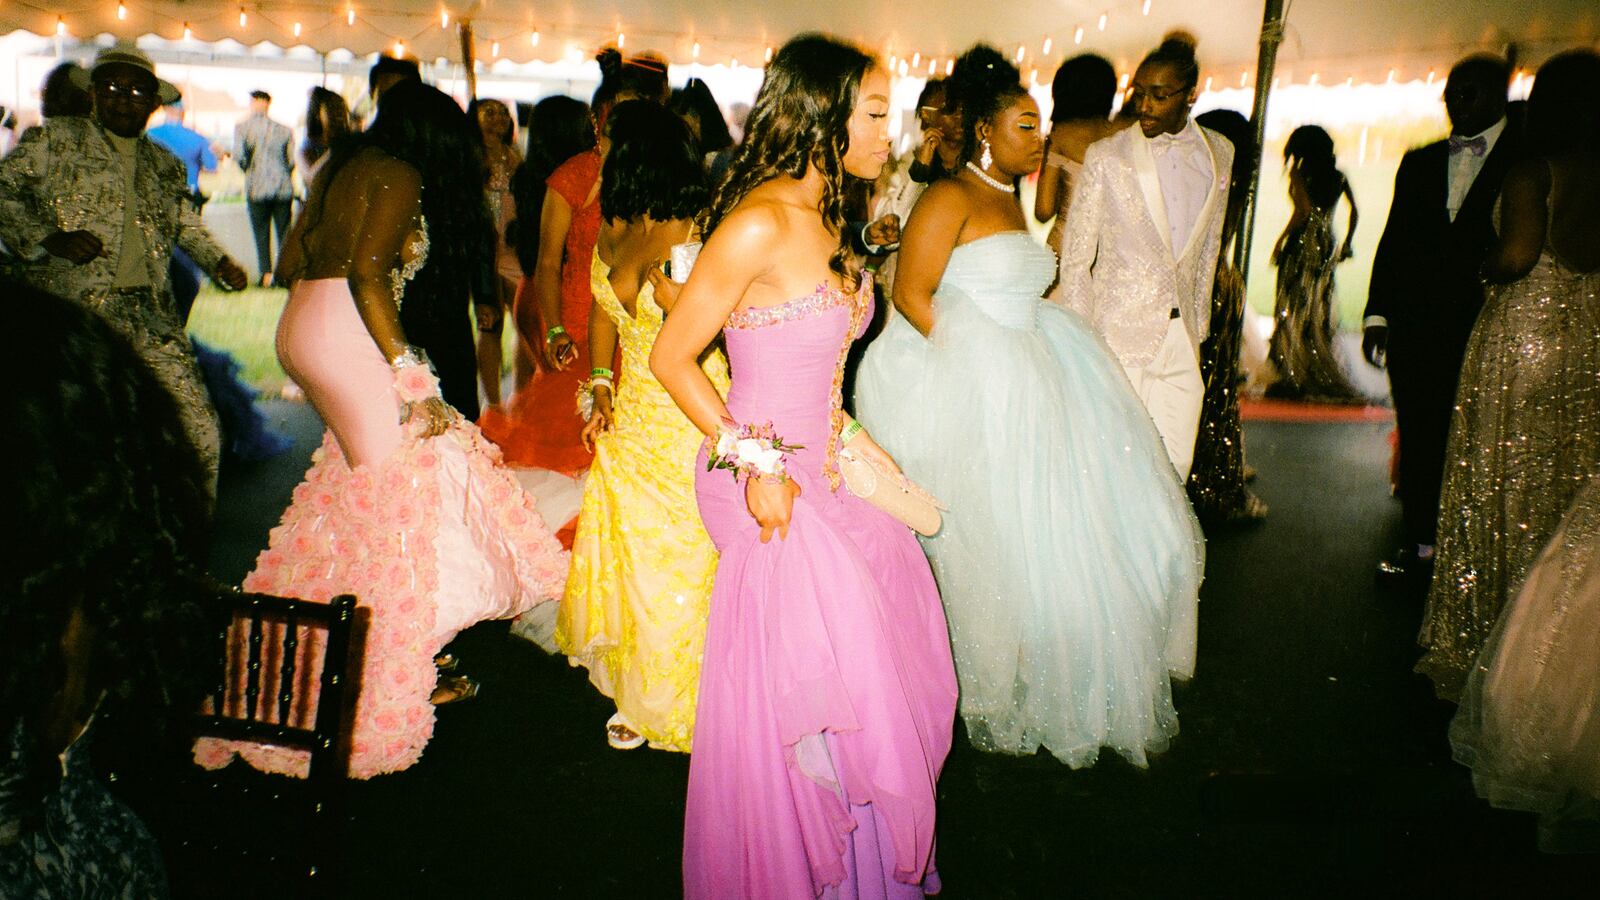 Teenagers dance together under a party tent, wearing a wide array of colorful dresses and suits as string lights illuminate the inside of the tent.